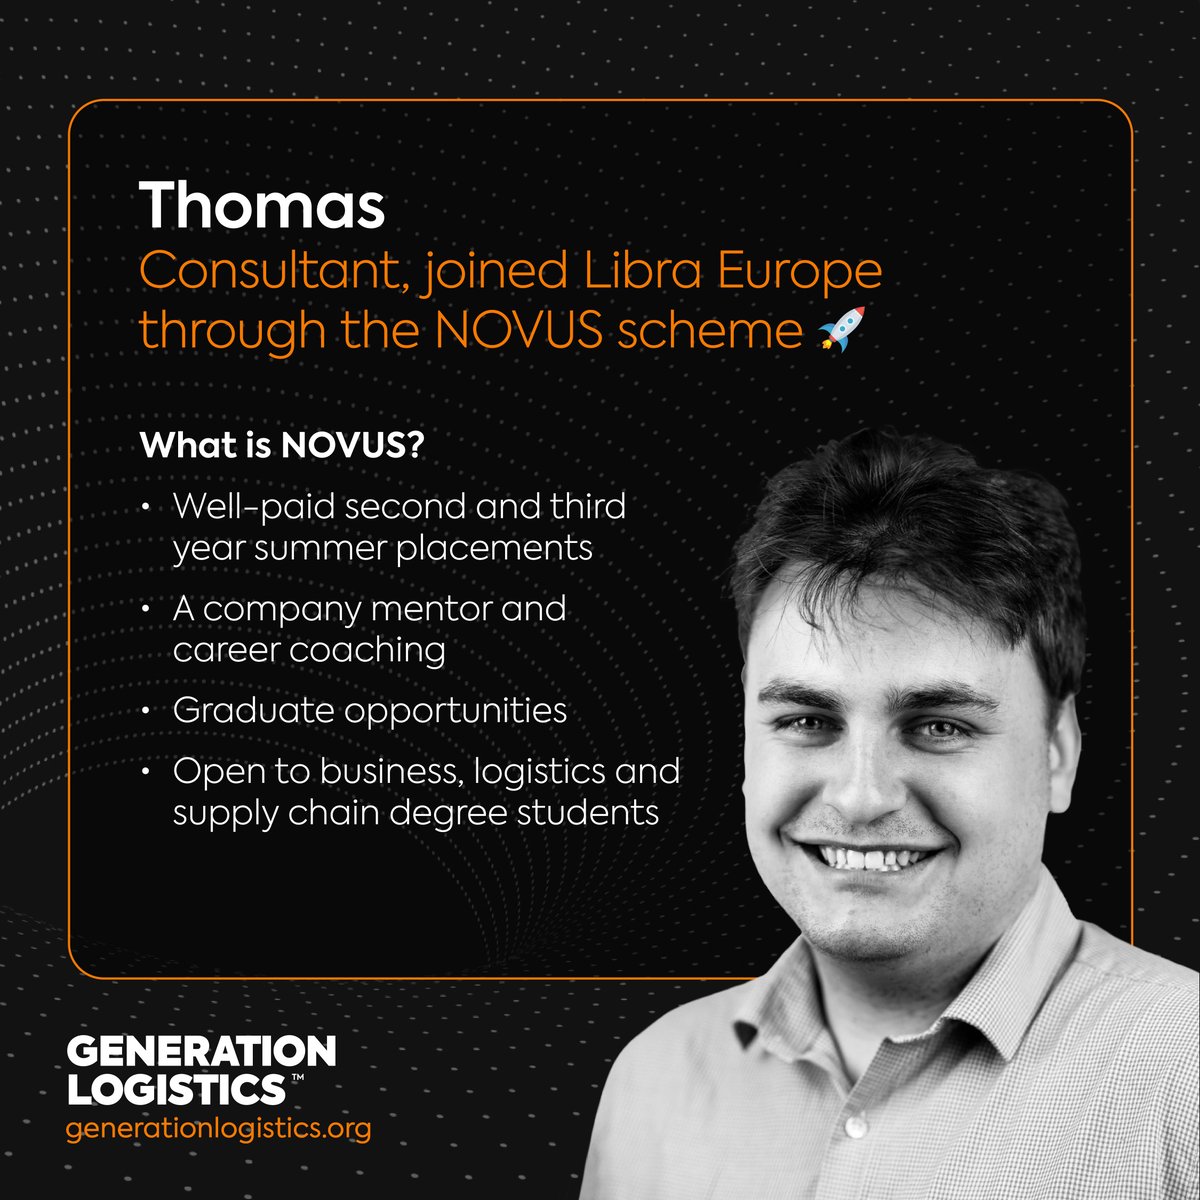 Thomas' journey began with @novustrust, offering him the perfect blend of hands-on work and rapid growth opportunities 📈 PLUS a GUARANTEED JOB at the end of it 🤝 @LtdLibra #NOVUS #CareerGoals #LearningAtWorkWeek